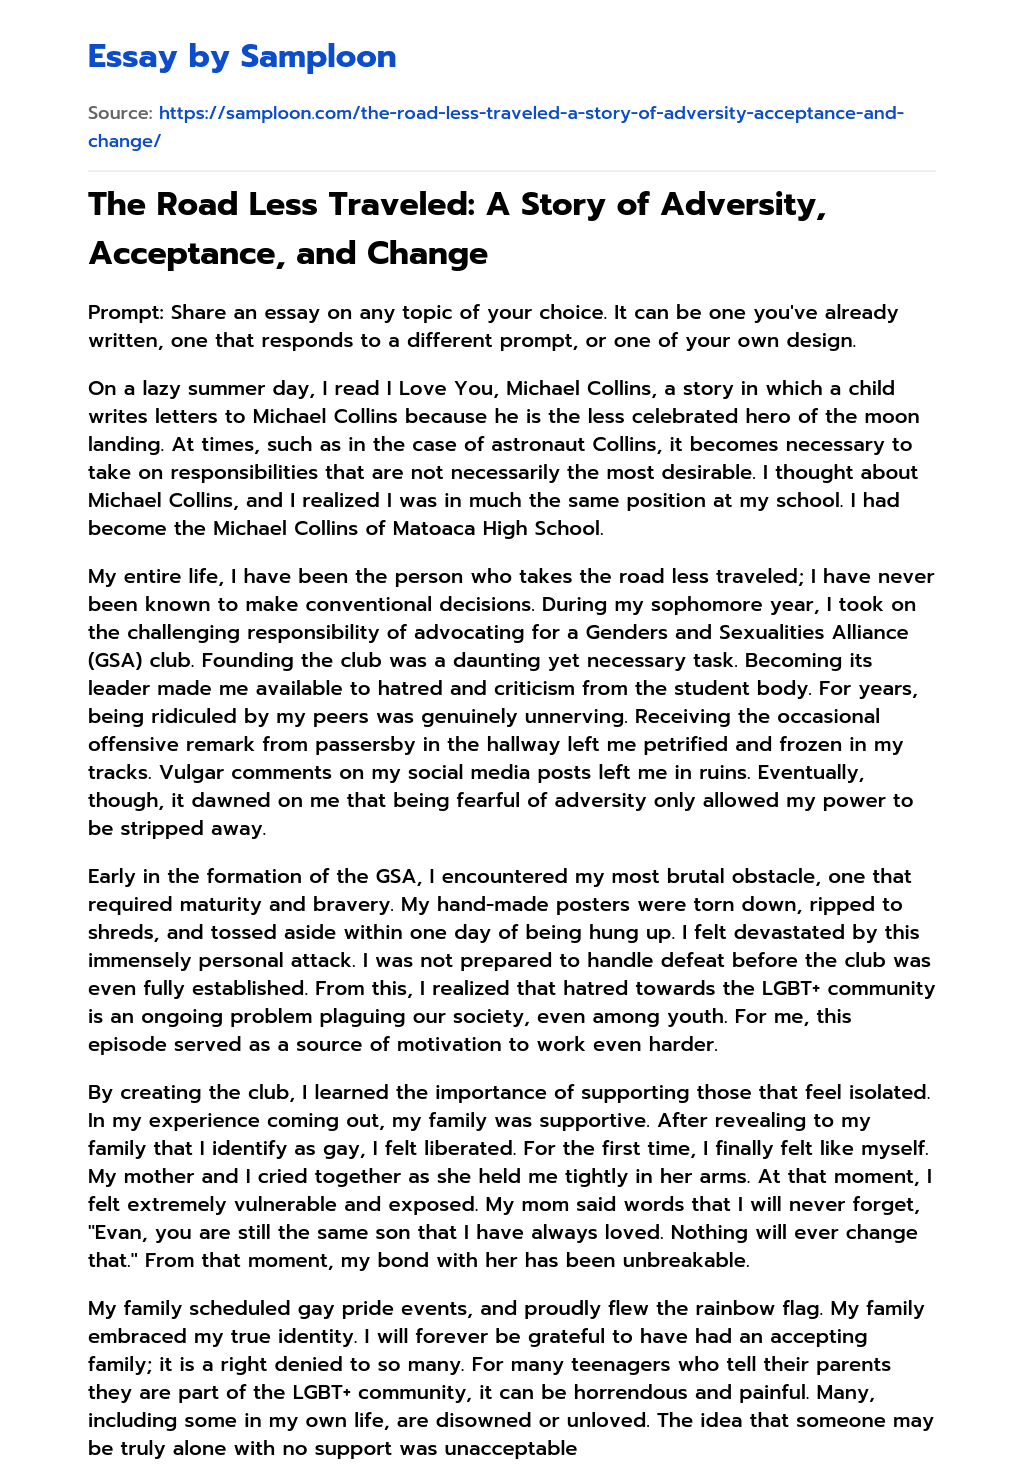 The Road Less Traveled: A Story of Adversity, Acceptance, and Change essay